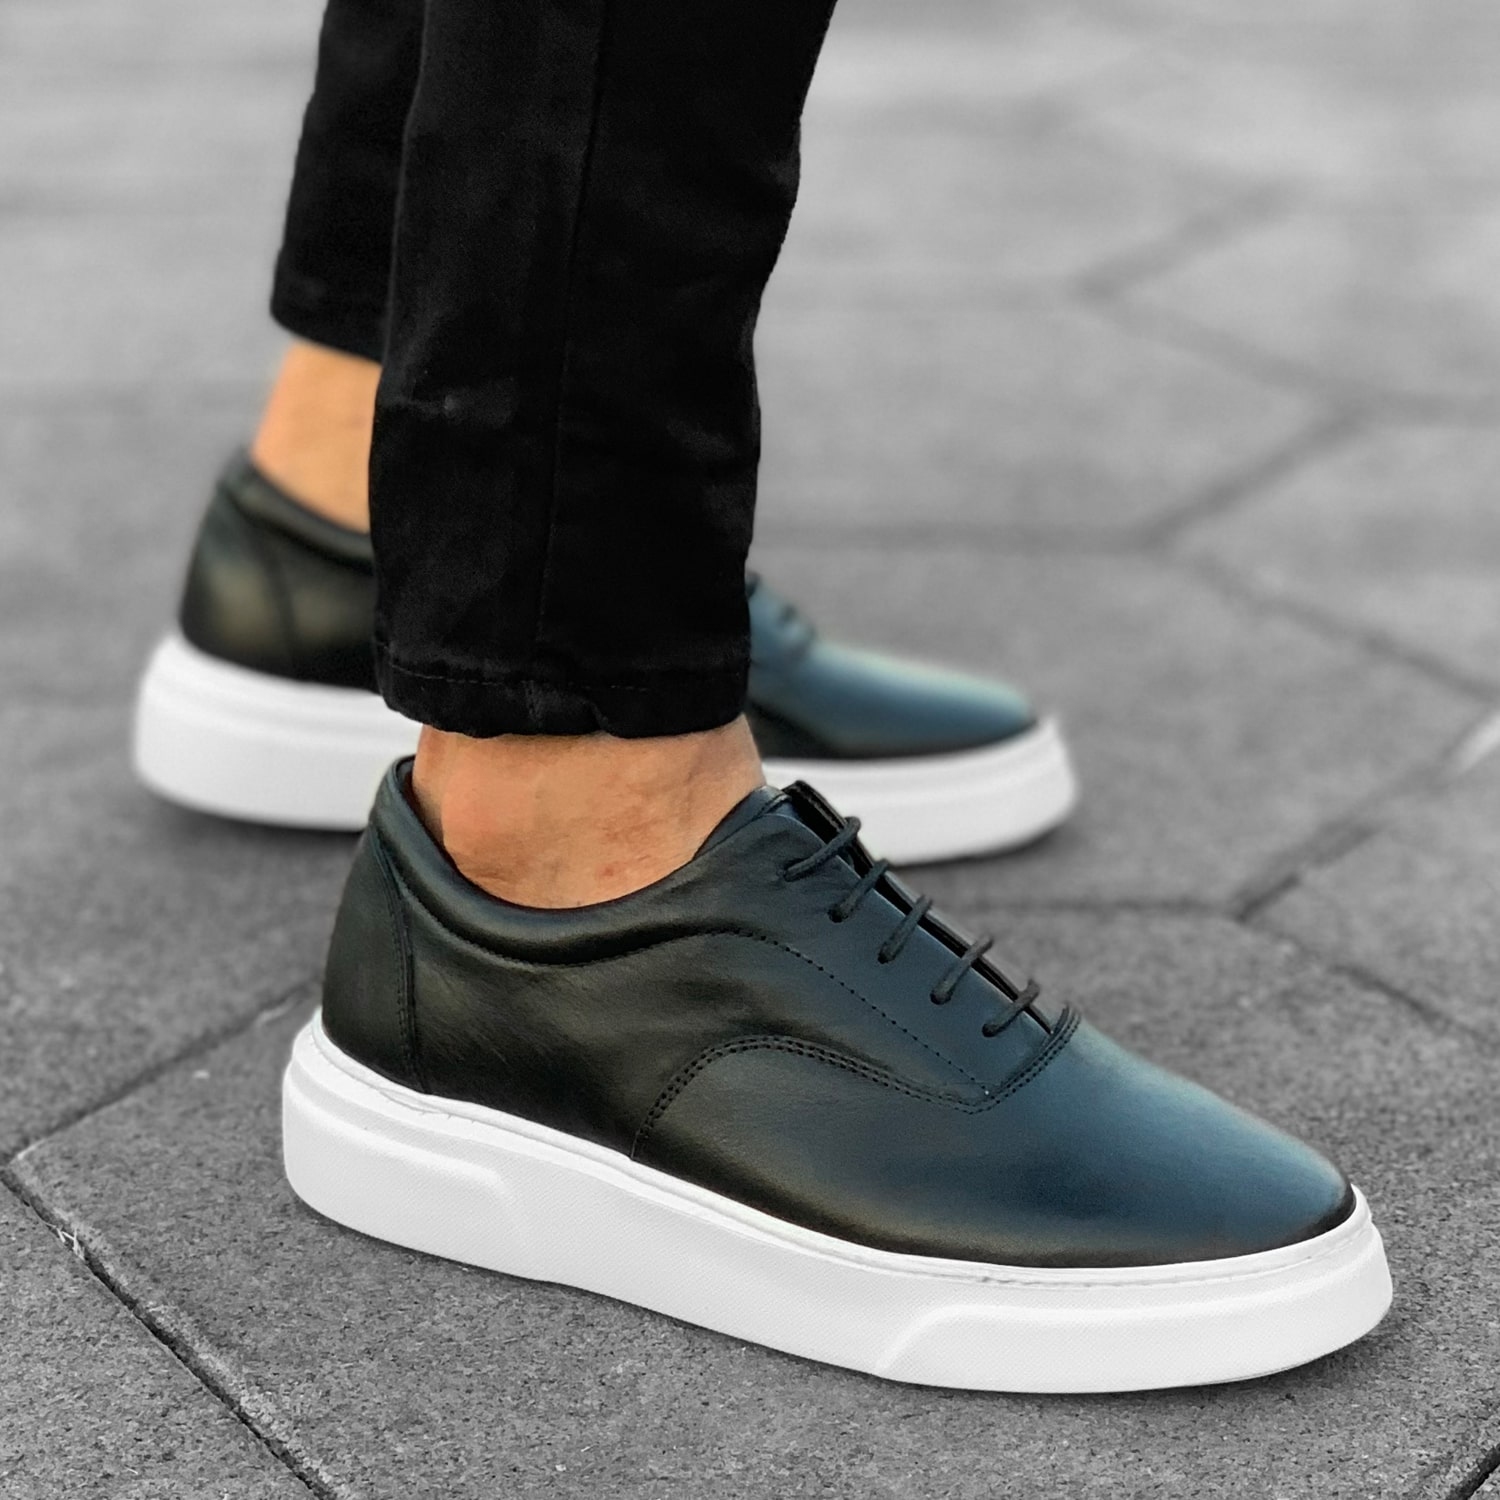 black and white casual sneakers